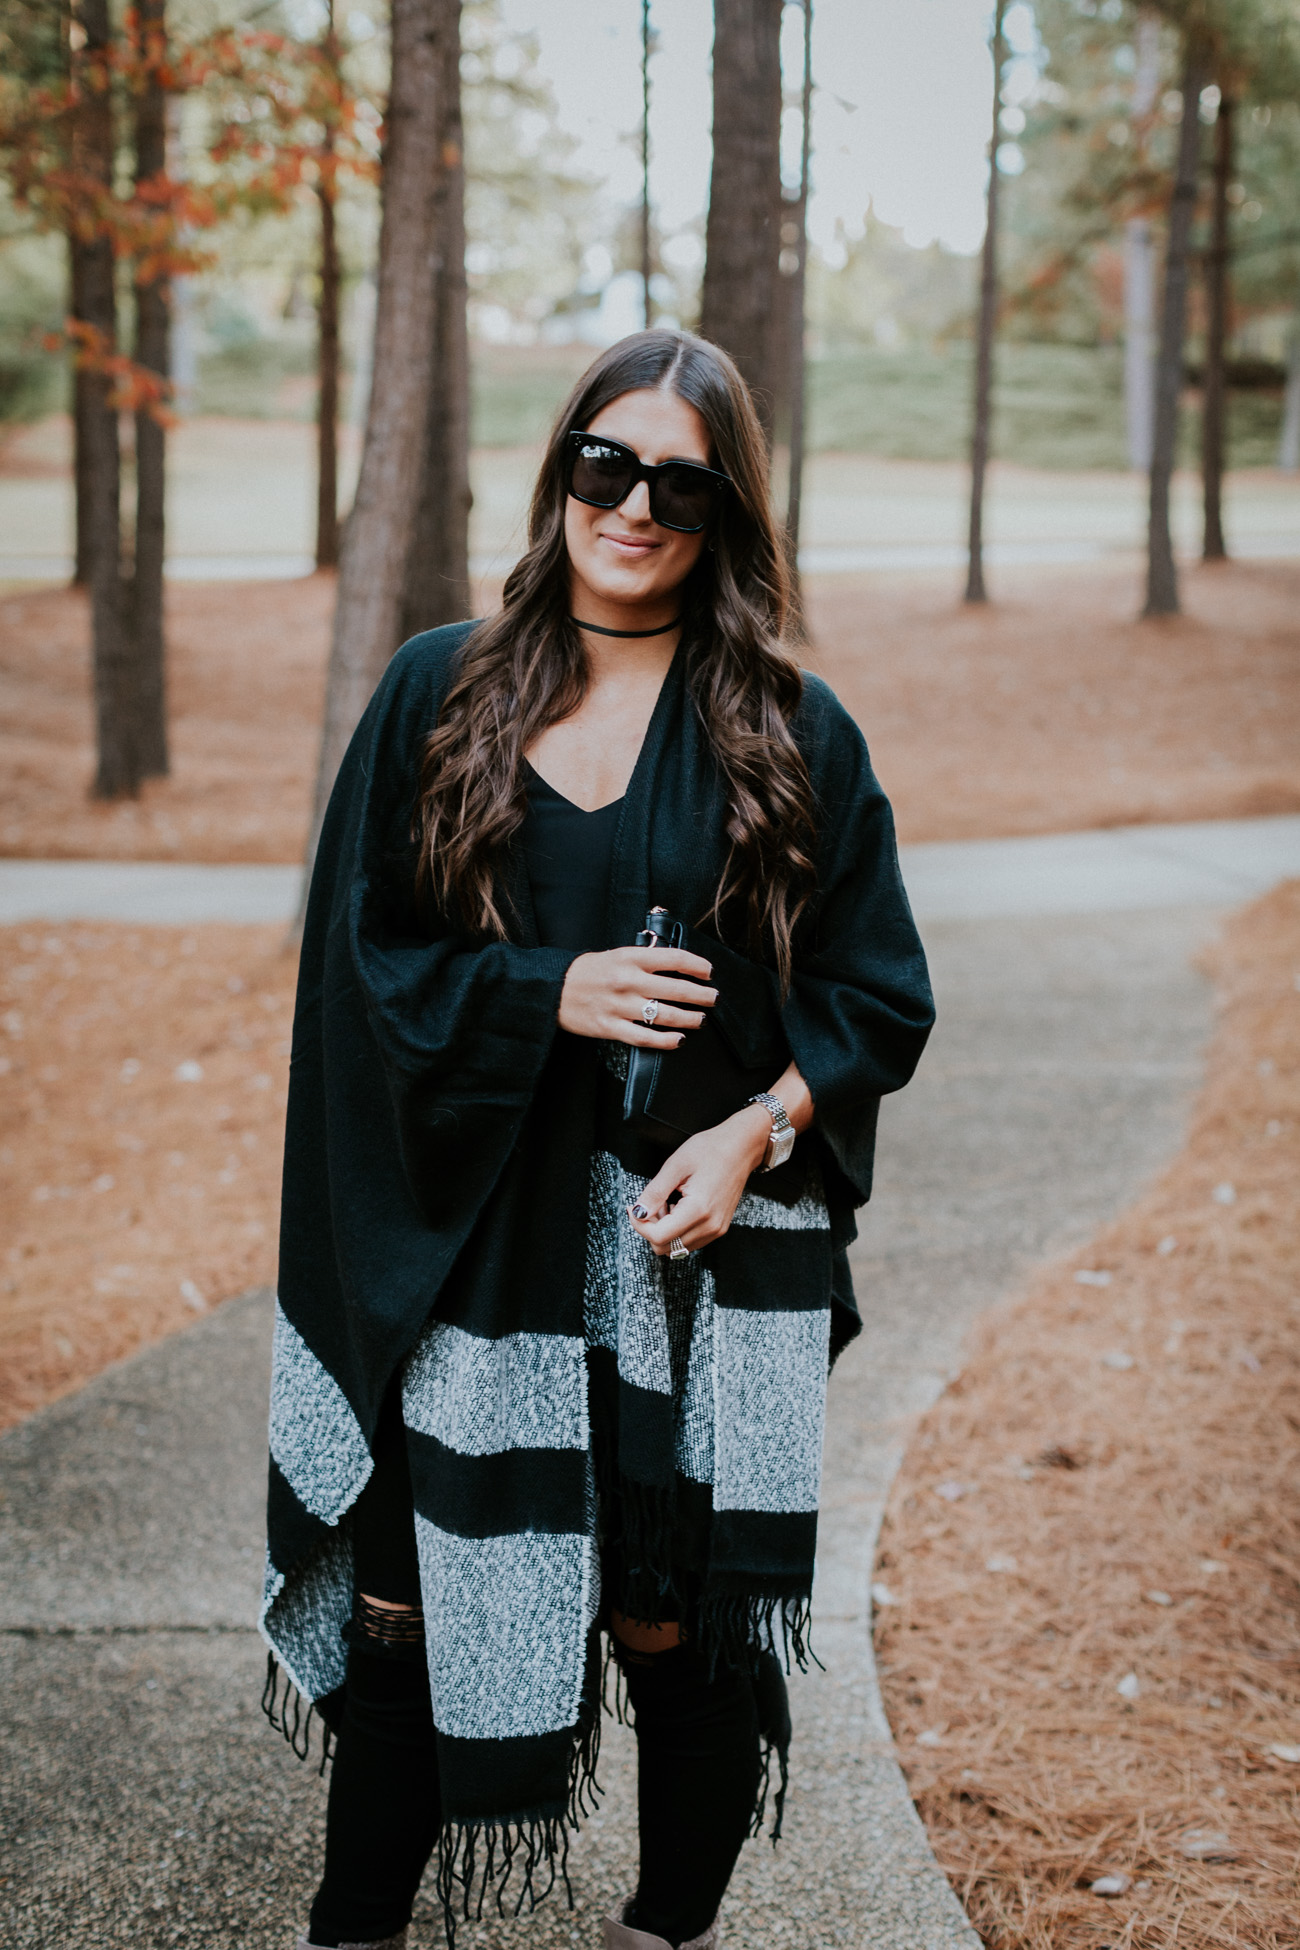 sole society holiday gift guide, sole society sale, sole society gift boxes, sole society poncho, gift sets for her, winter booties, friendsgiving outfit // grace wainwright a southern drawl